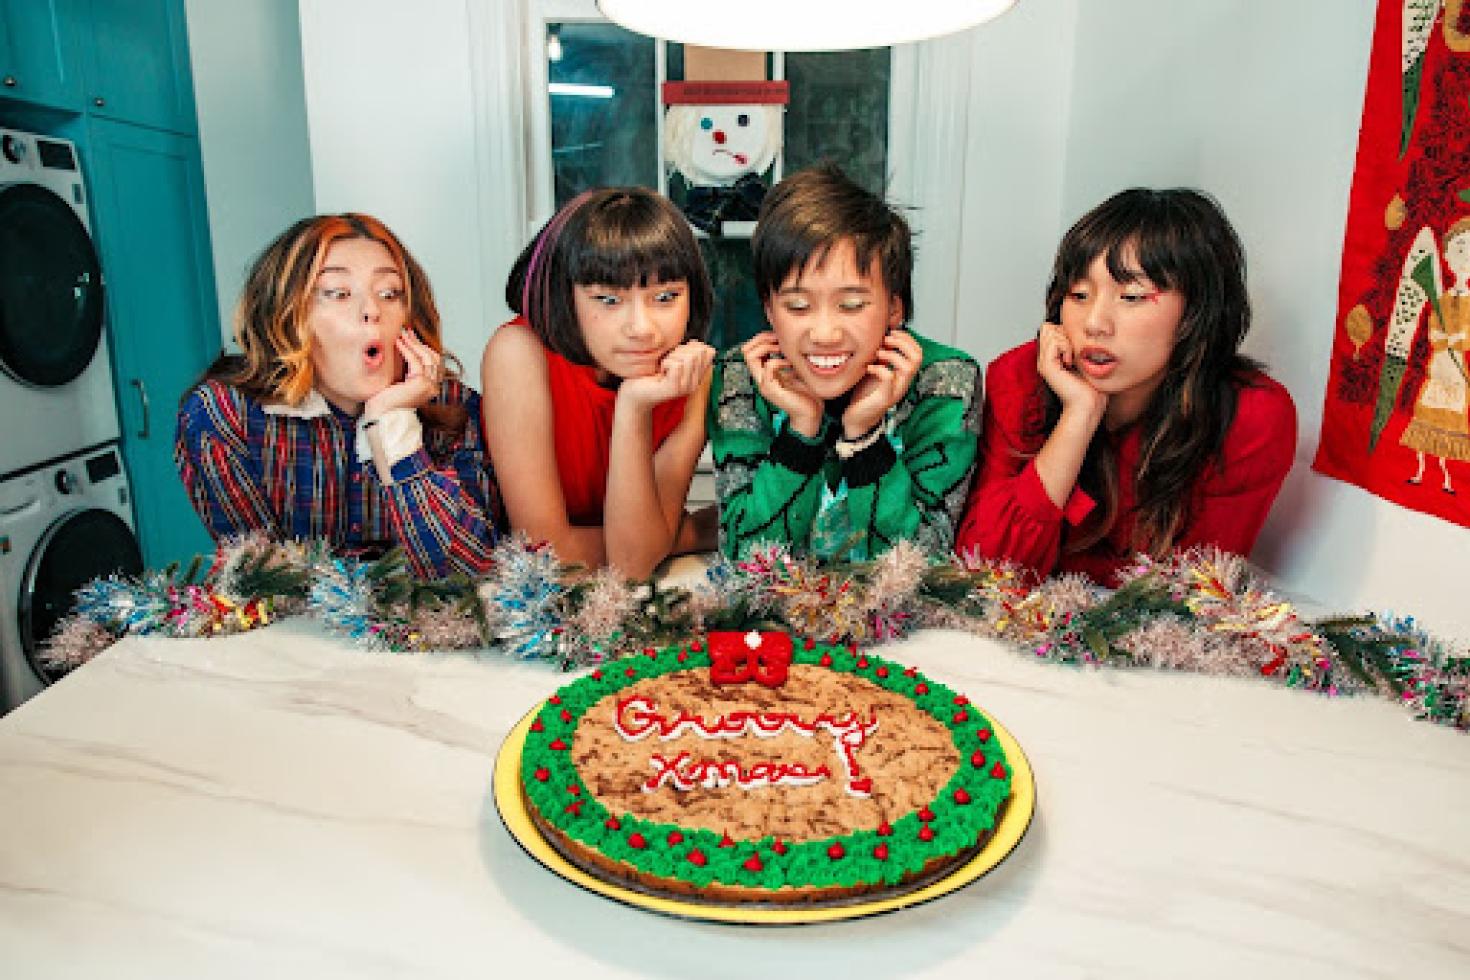 The Linda Lindas release video for holiday single 'Groovy Xmas'